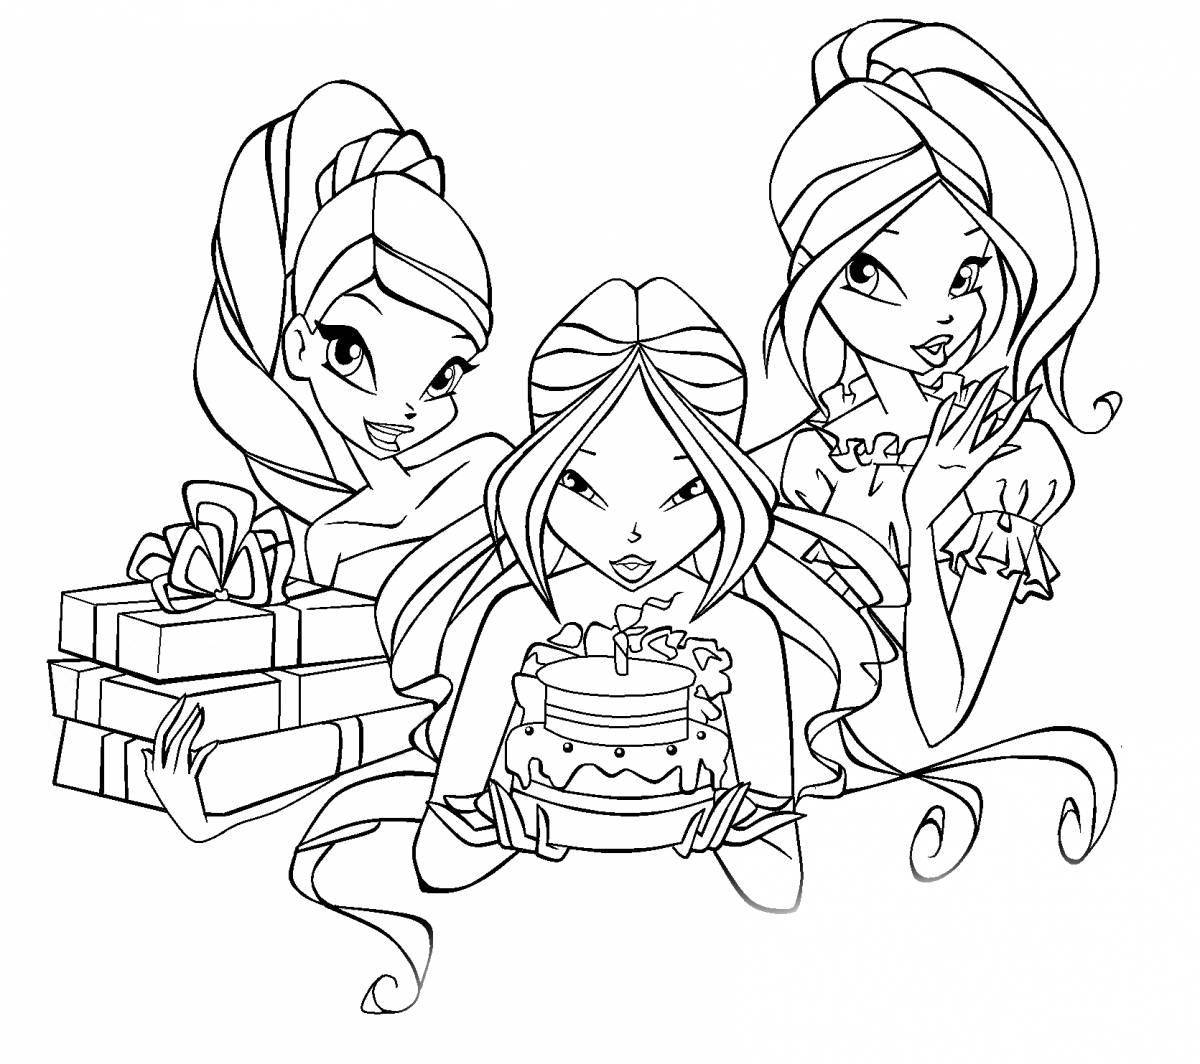 Great winx coloring book